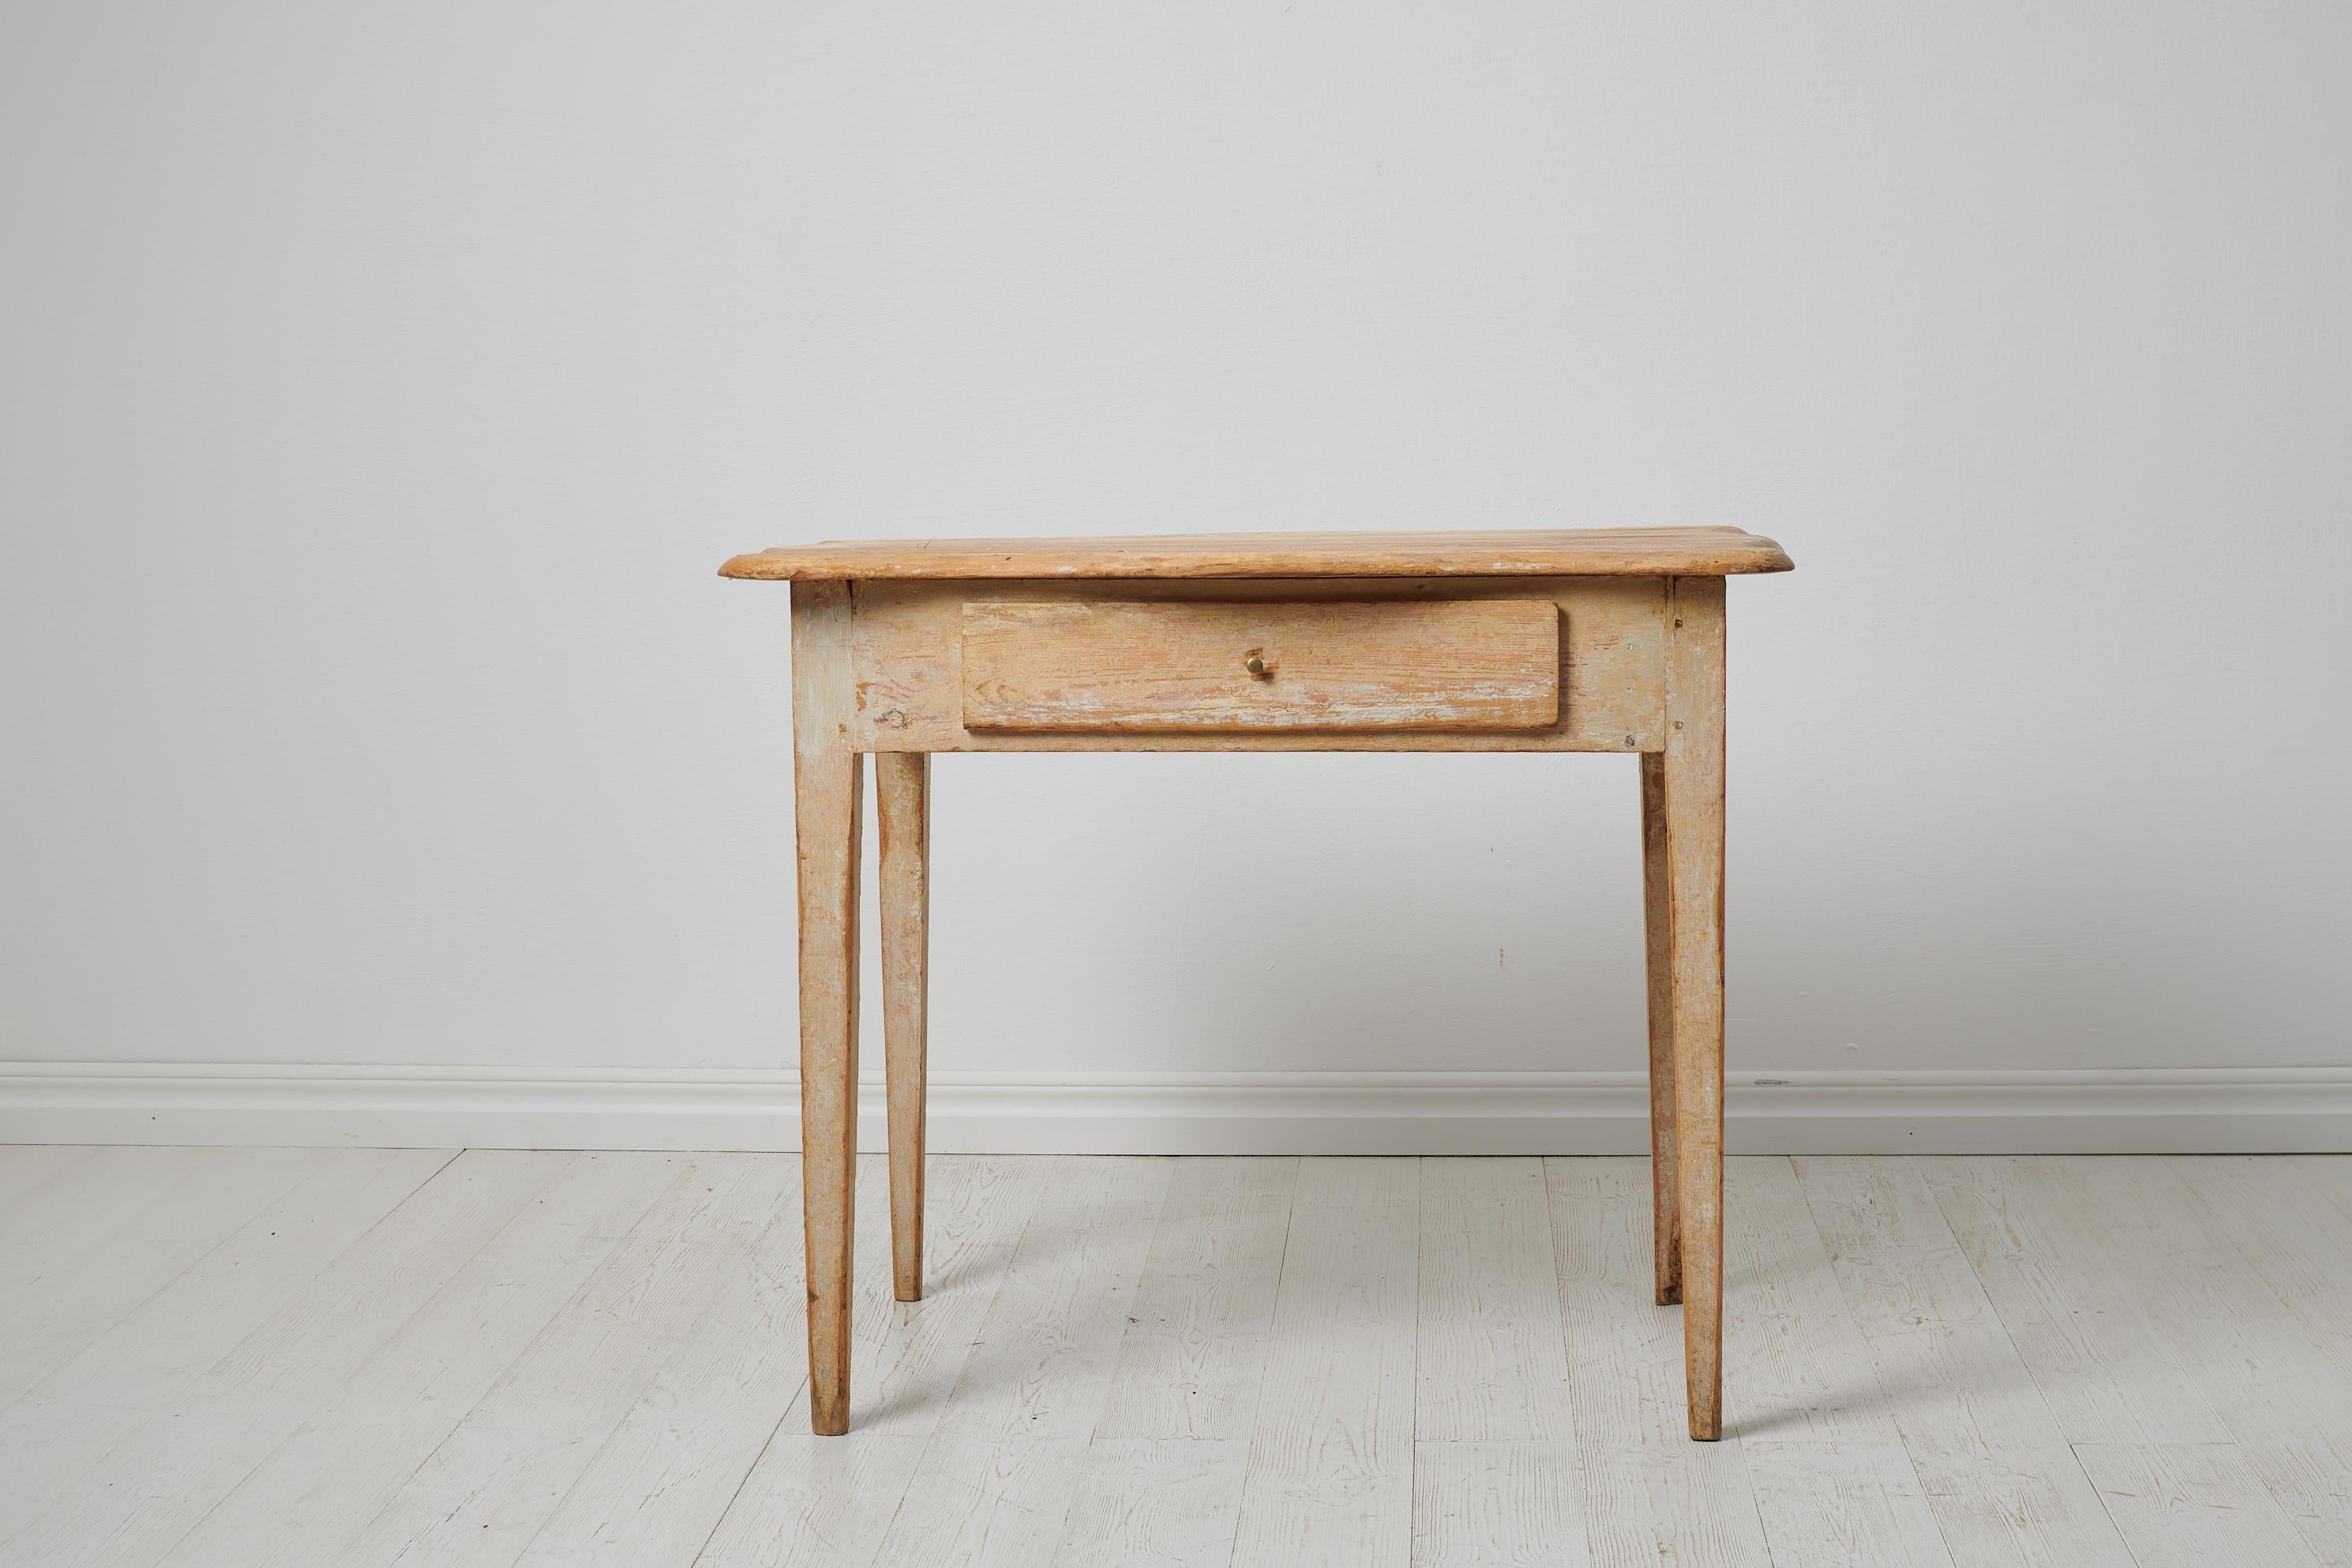 Antique country house table from northern Sweden made around 1820. The table has straight tapered legs and a drawer. The table top has a very unusual shape with a profiled edge around, see picture. On the table top the paint is worn off while the